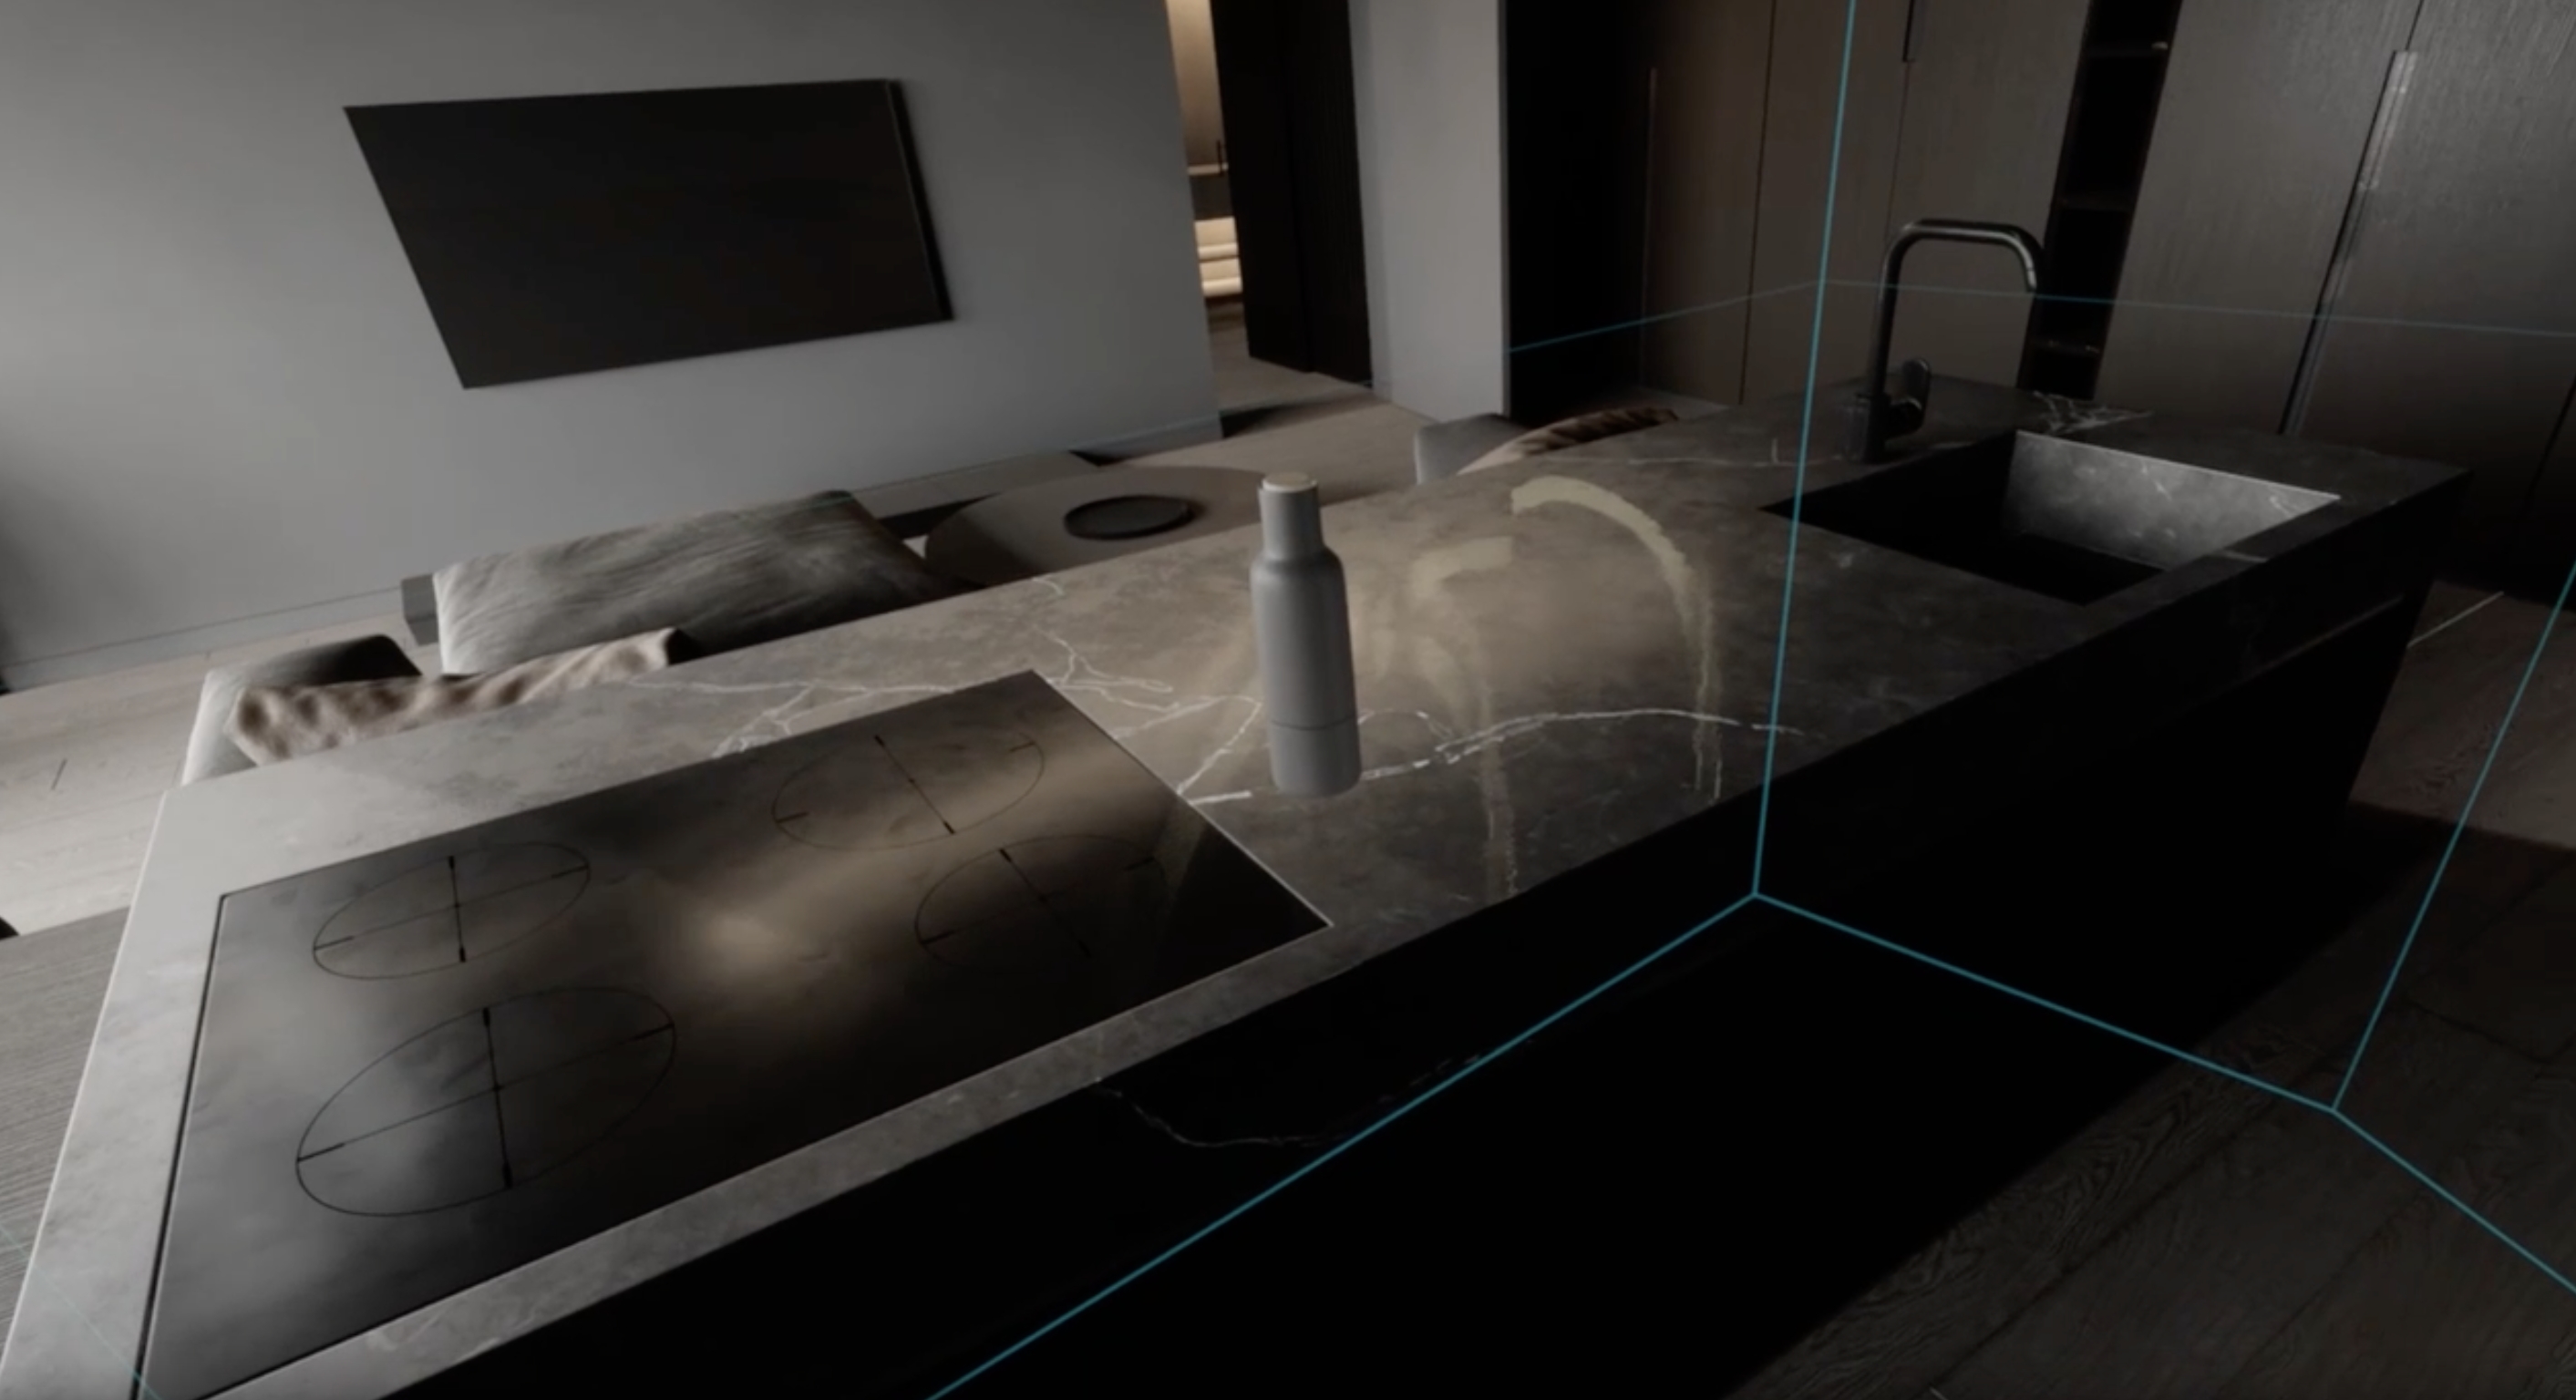 VR walkthrough of the interior - screenshot from the video recording